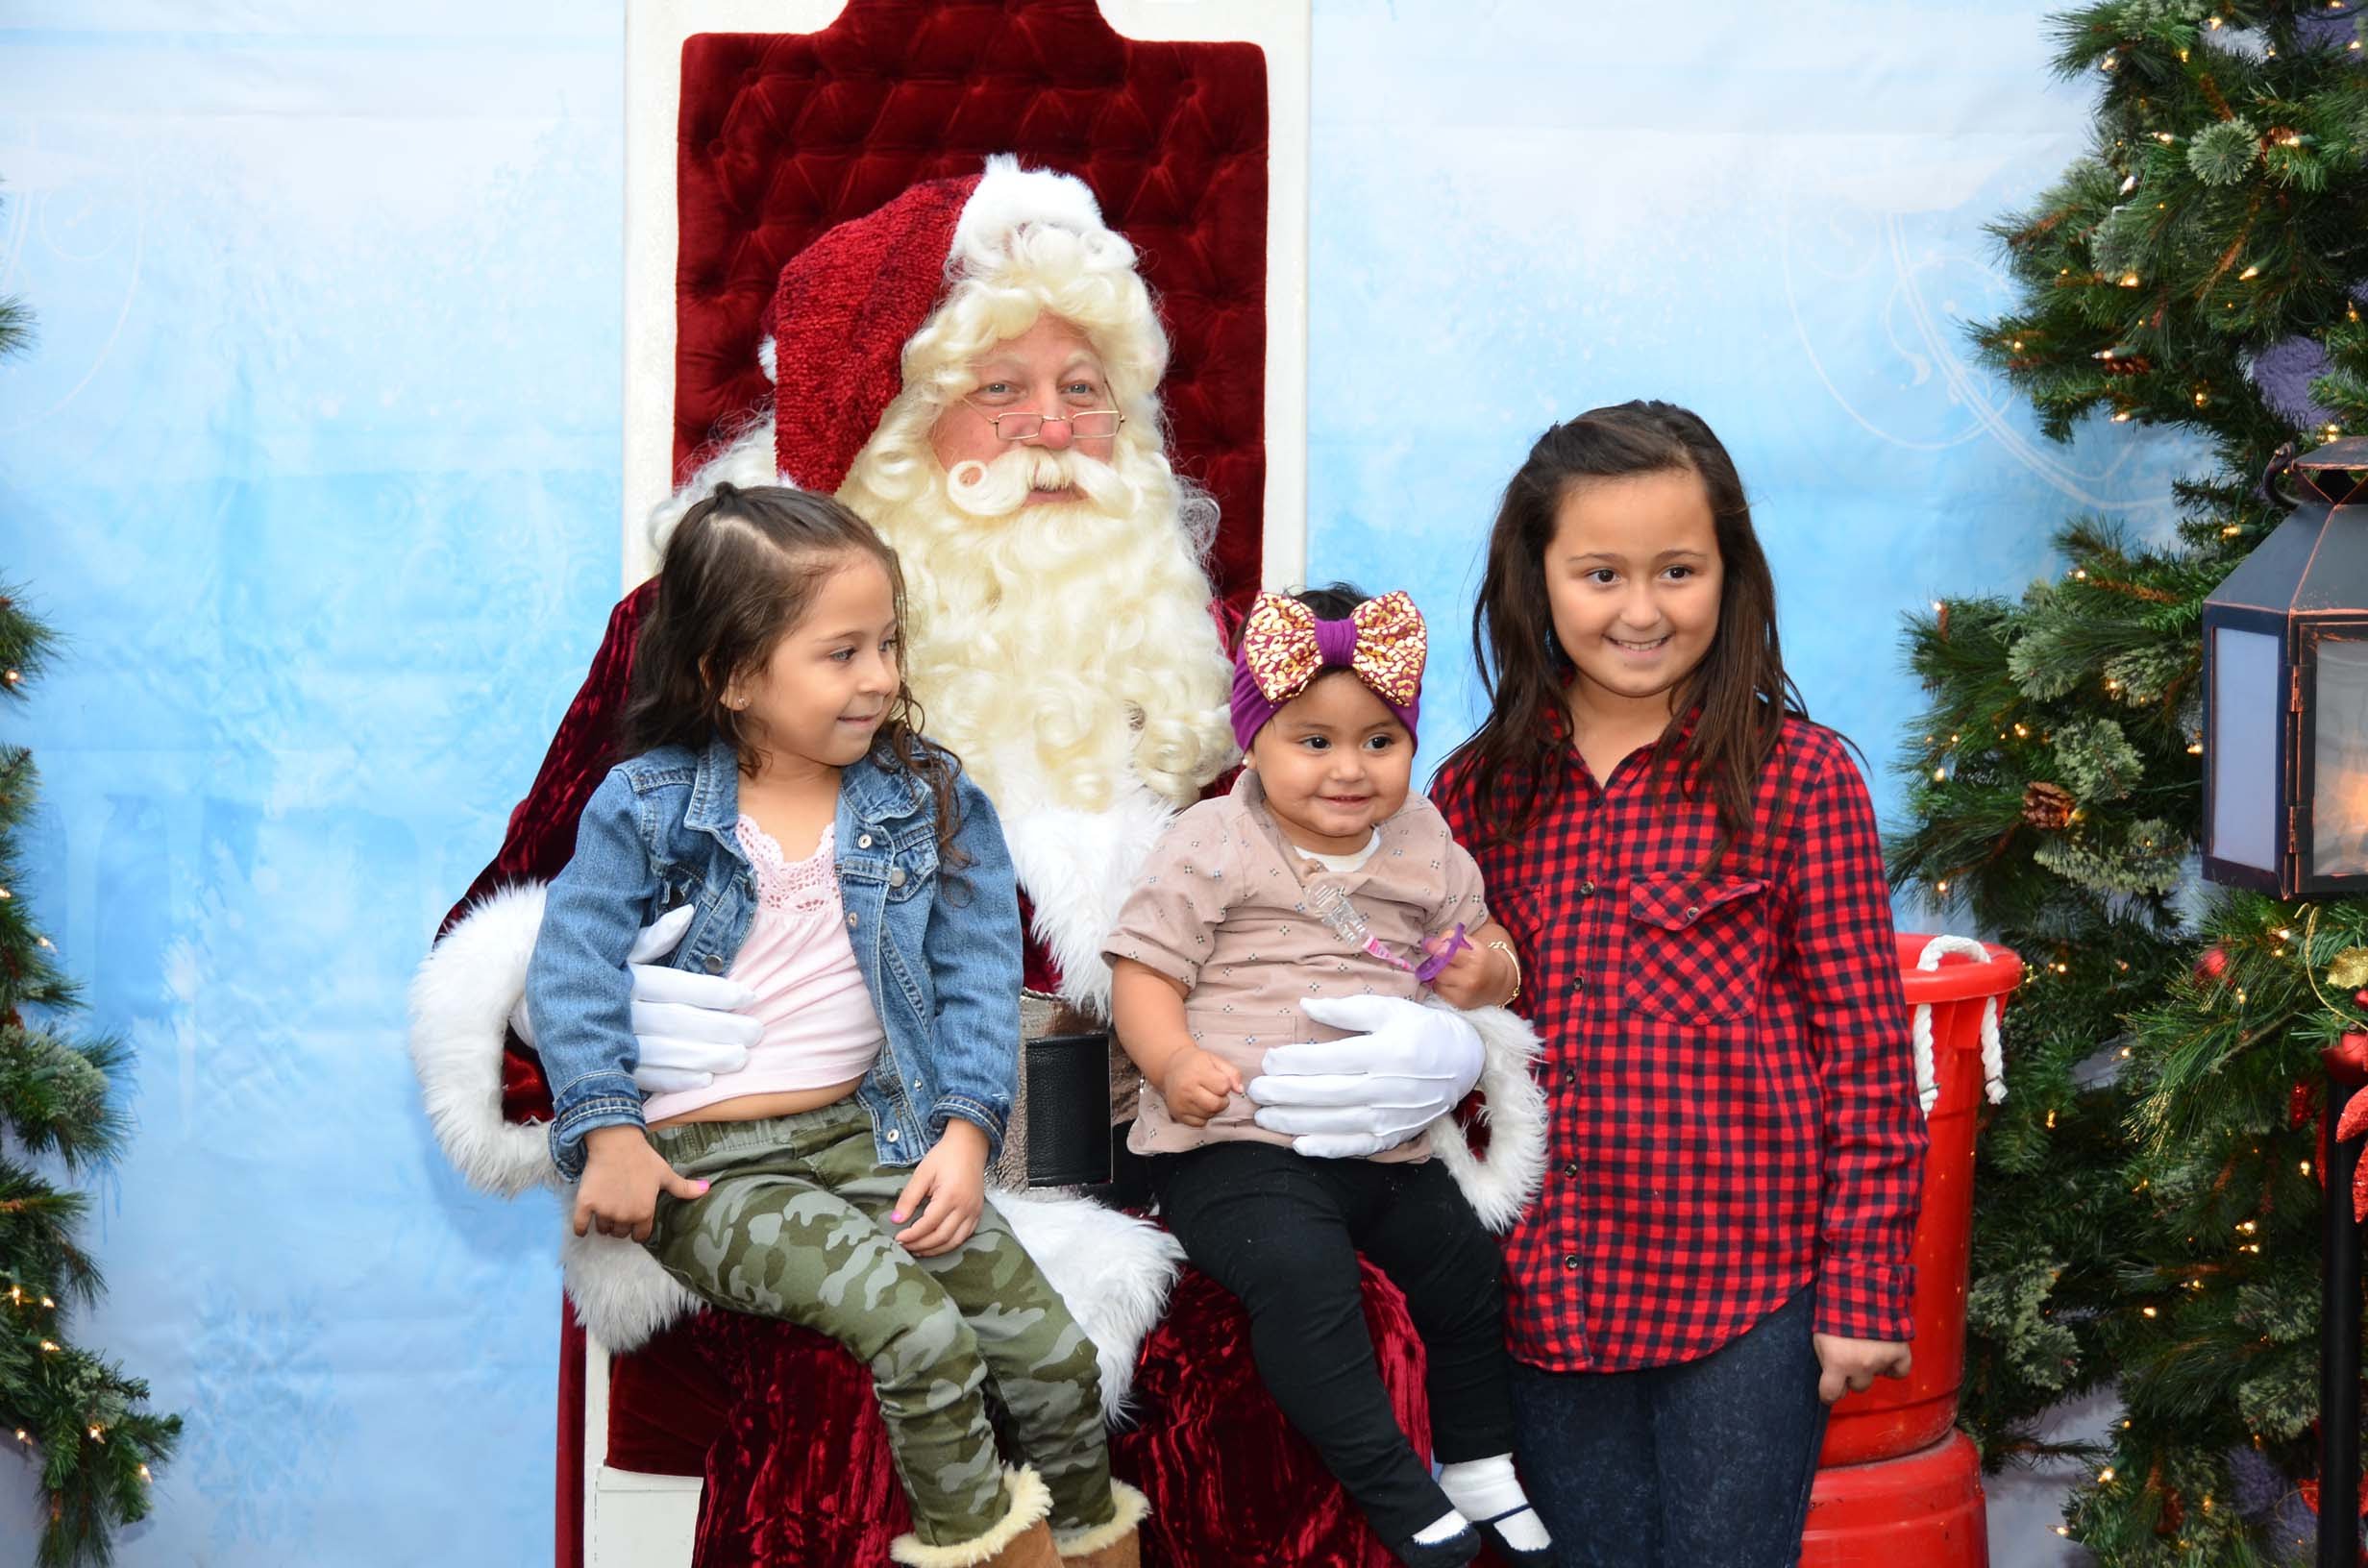 The Winter Holiday Festival Comes To LA’s Pershing Square